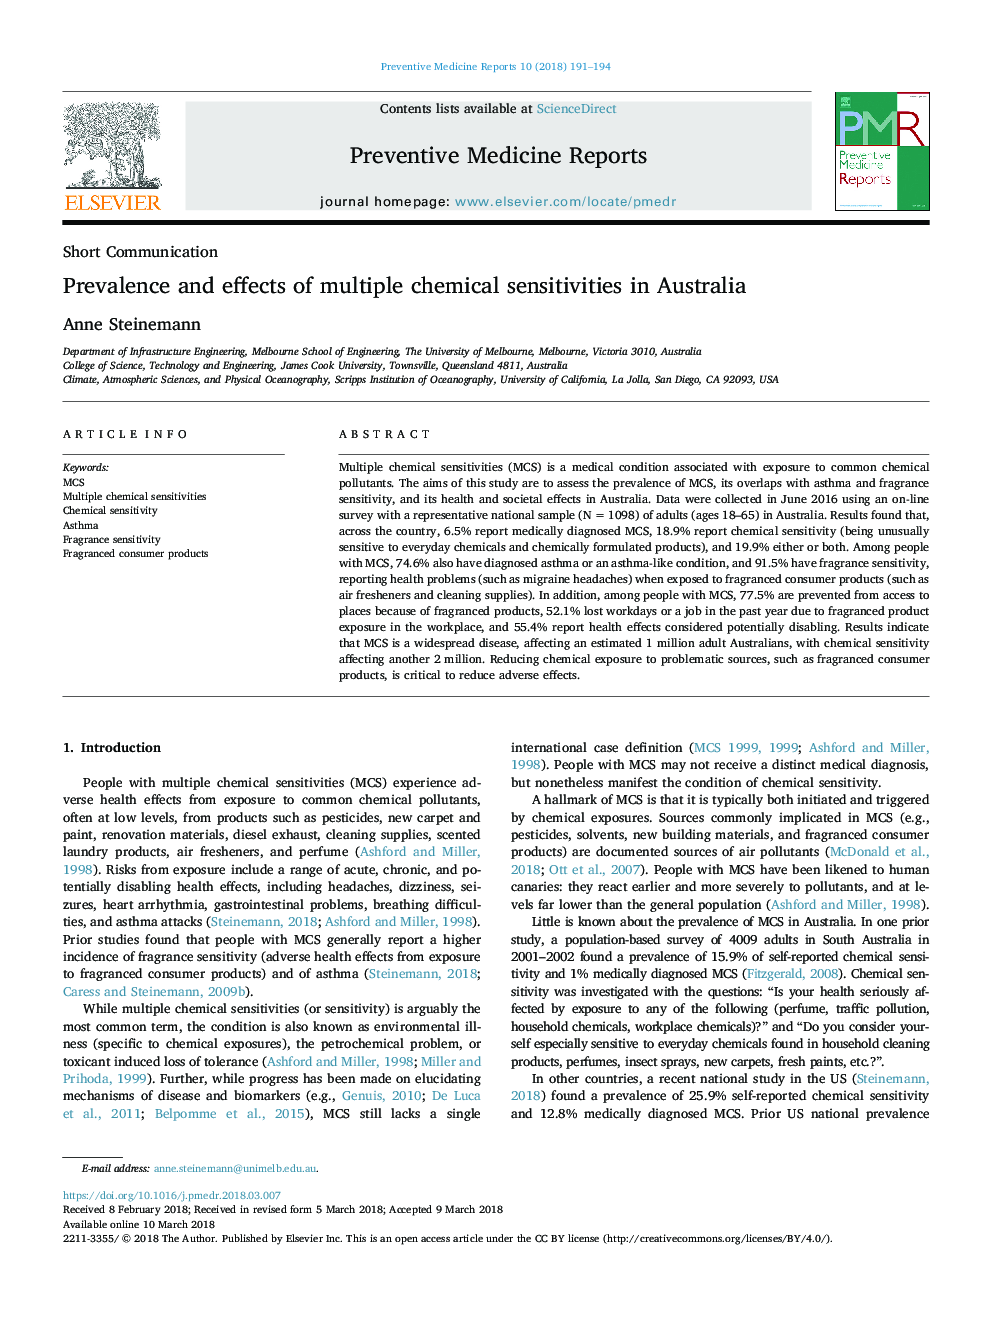 Prevalence and effects of multiple chemical sensitivities in Australia